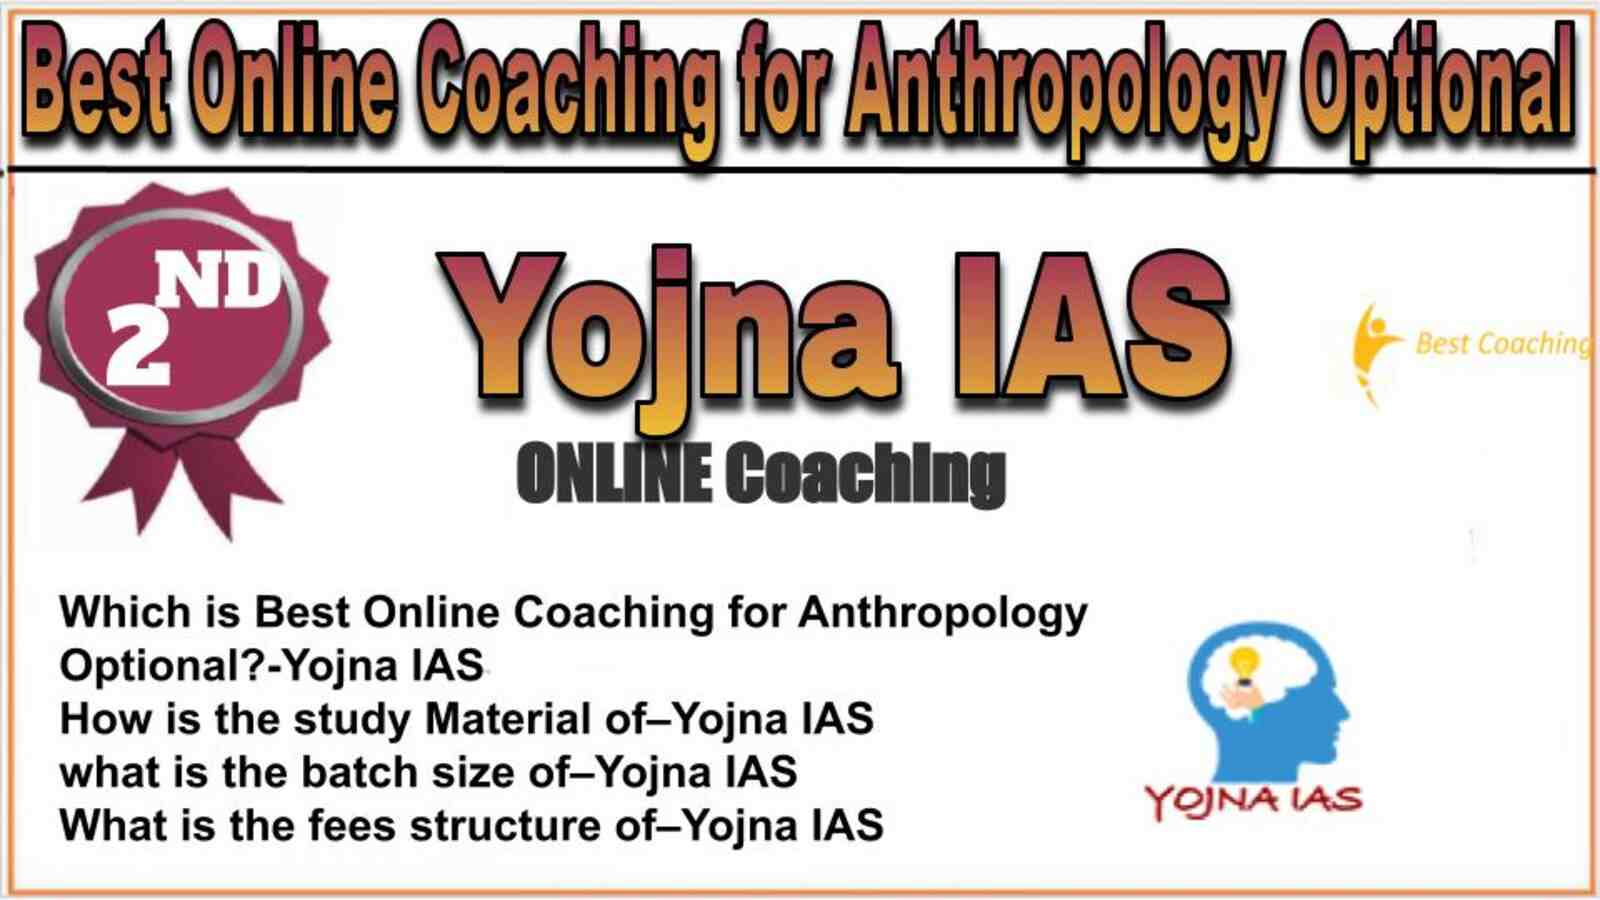 Rank 2 best online coaching for Anthropology Optional